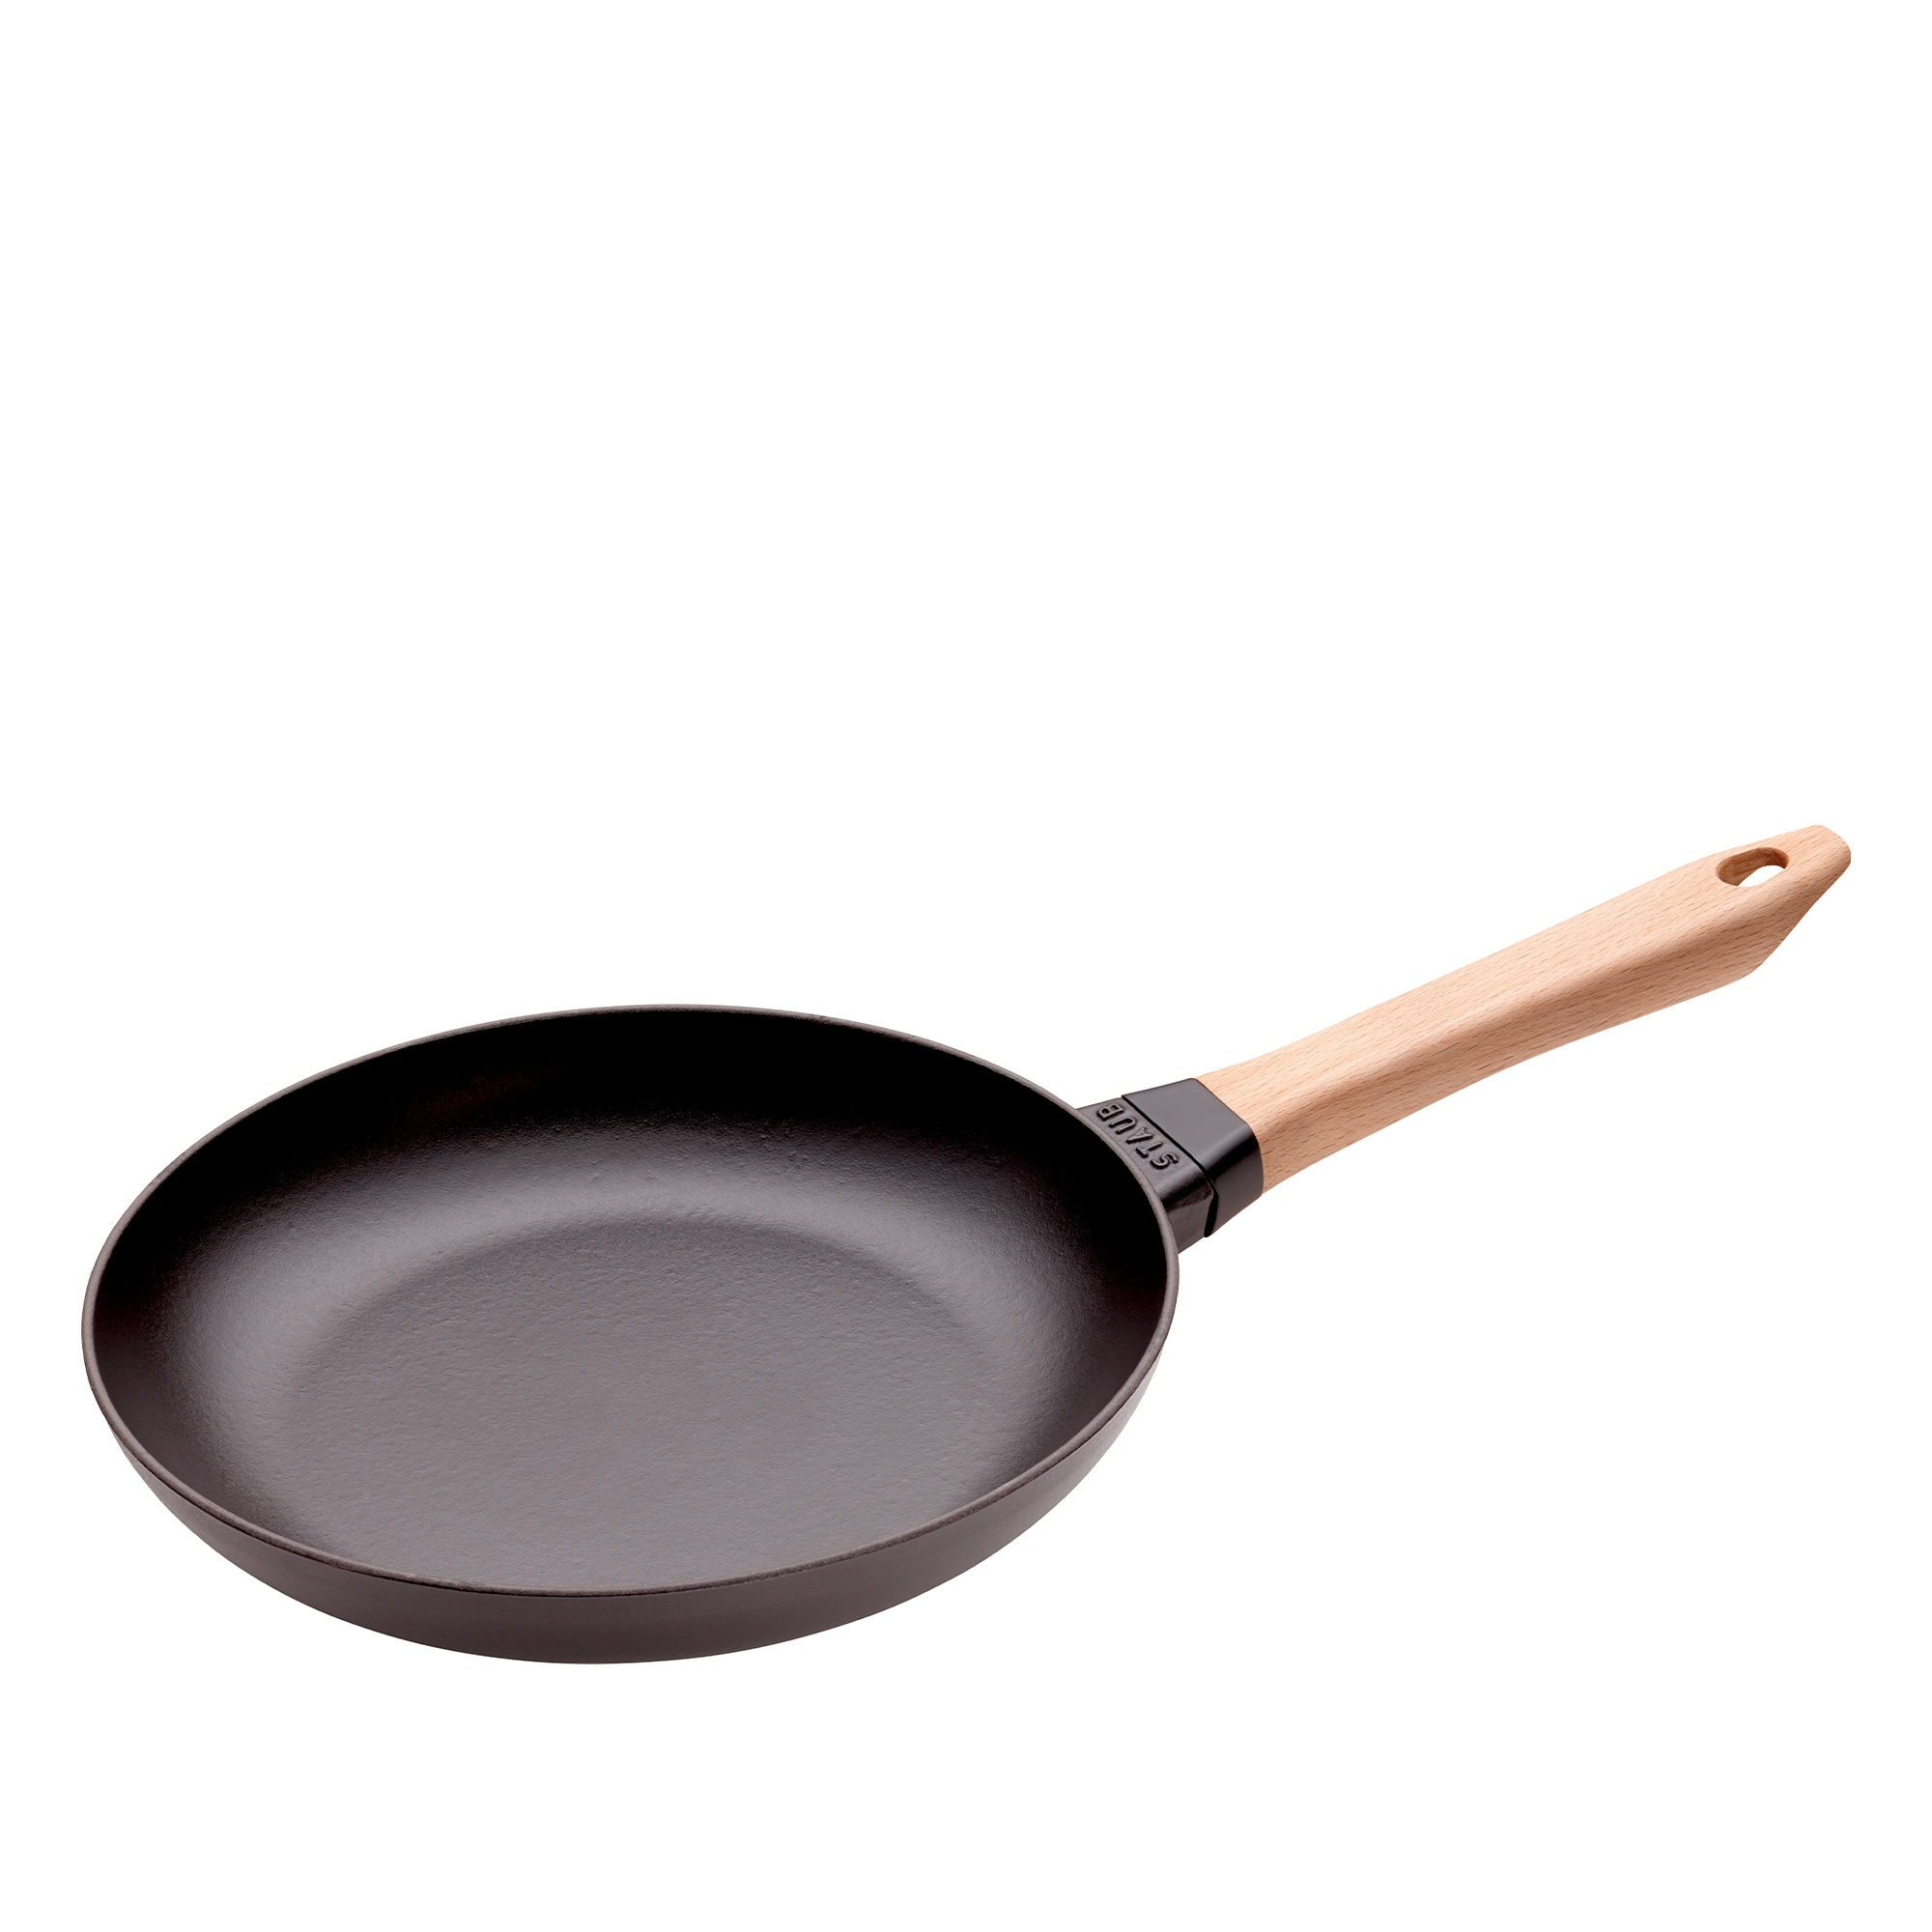 Staub - Frypan with wooden handle